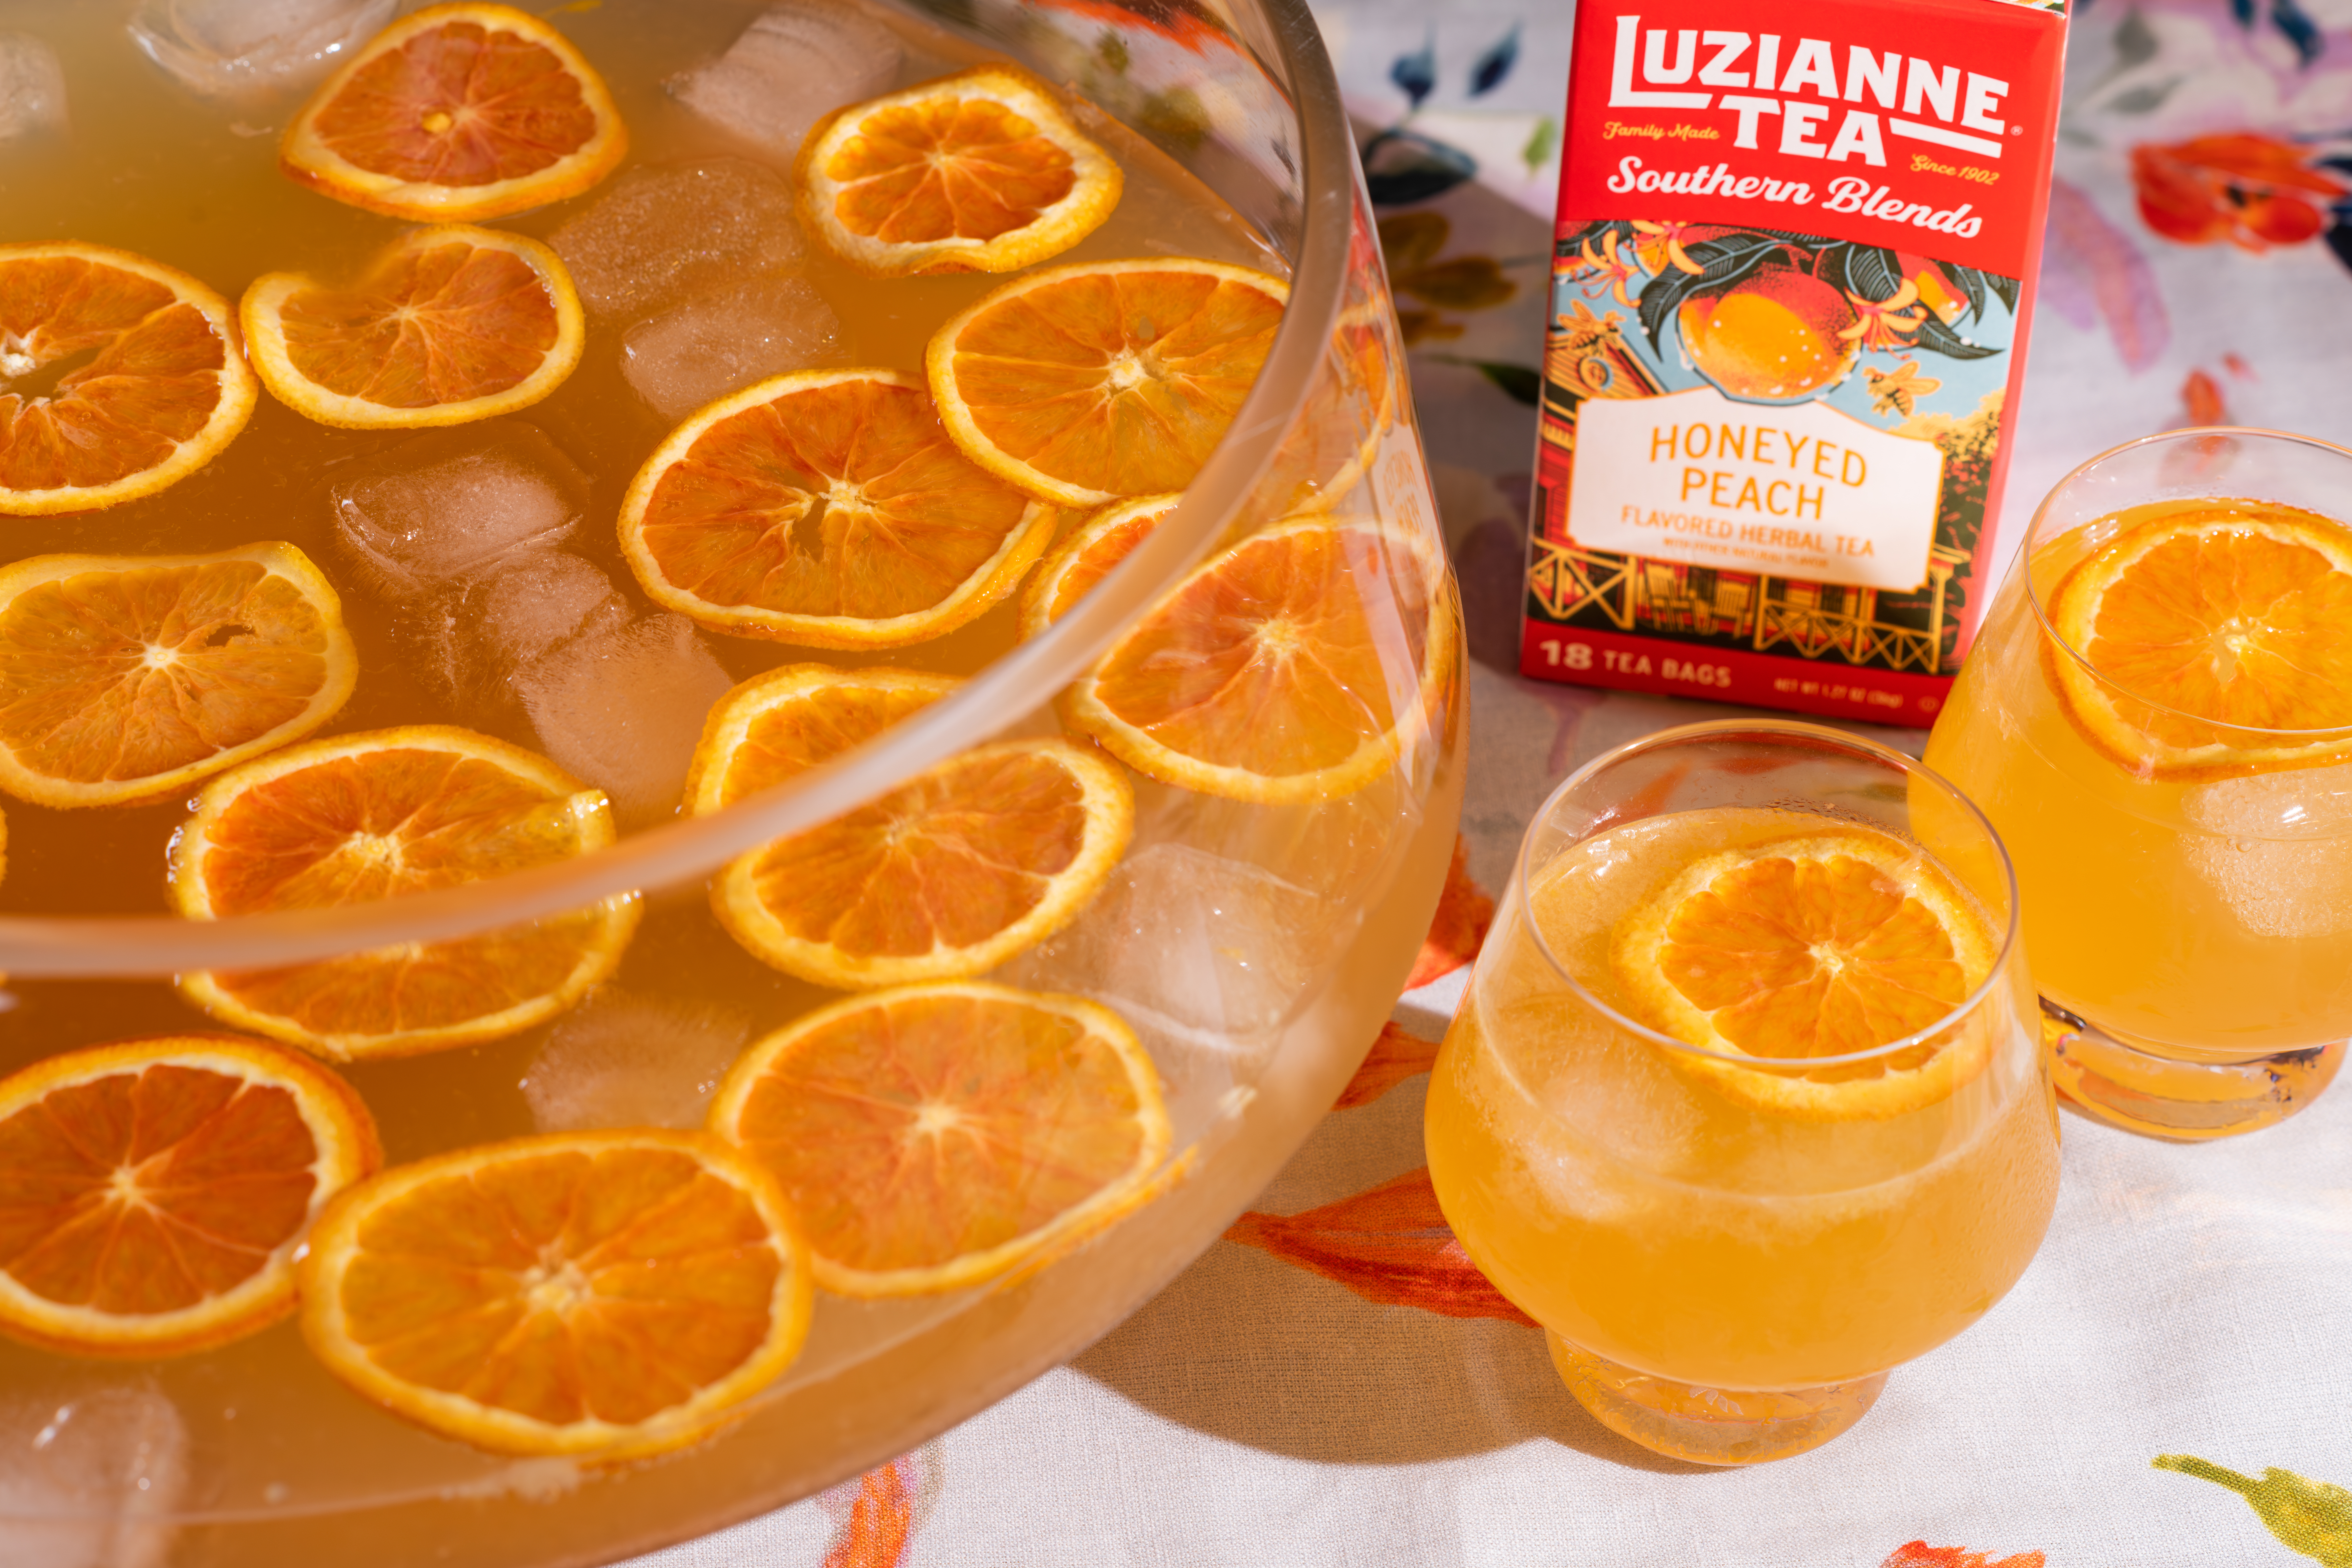 The Imperial Honeyed Peach Party Punch bowl and glasses of punch